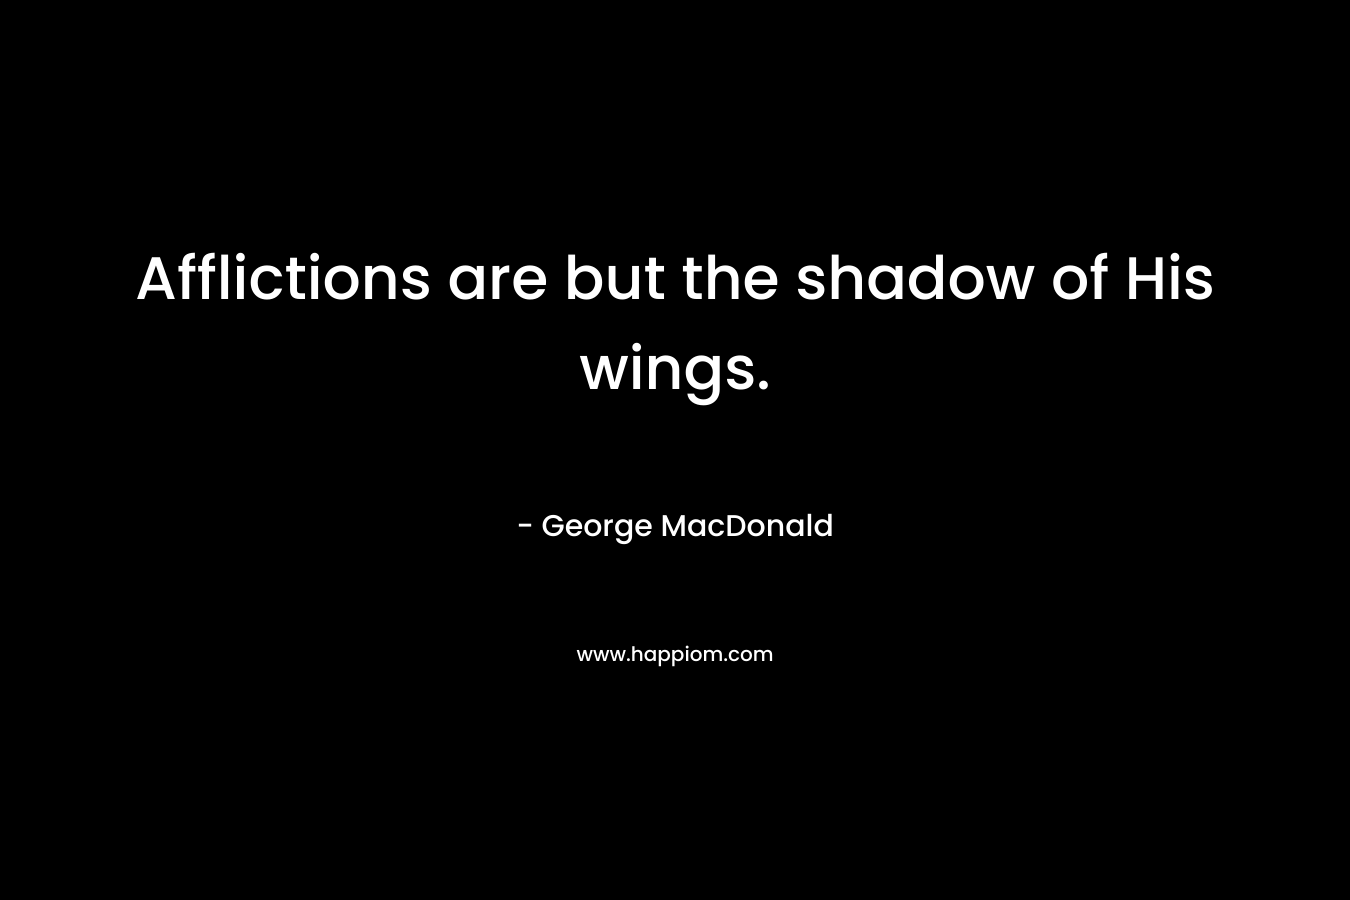 Afflictions are but the shadow of His wings.